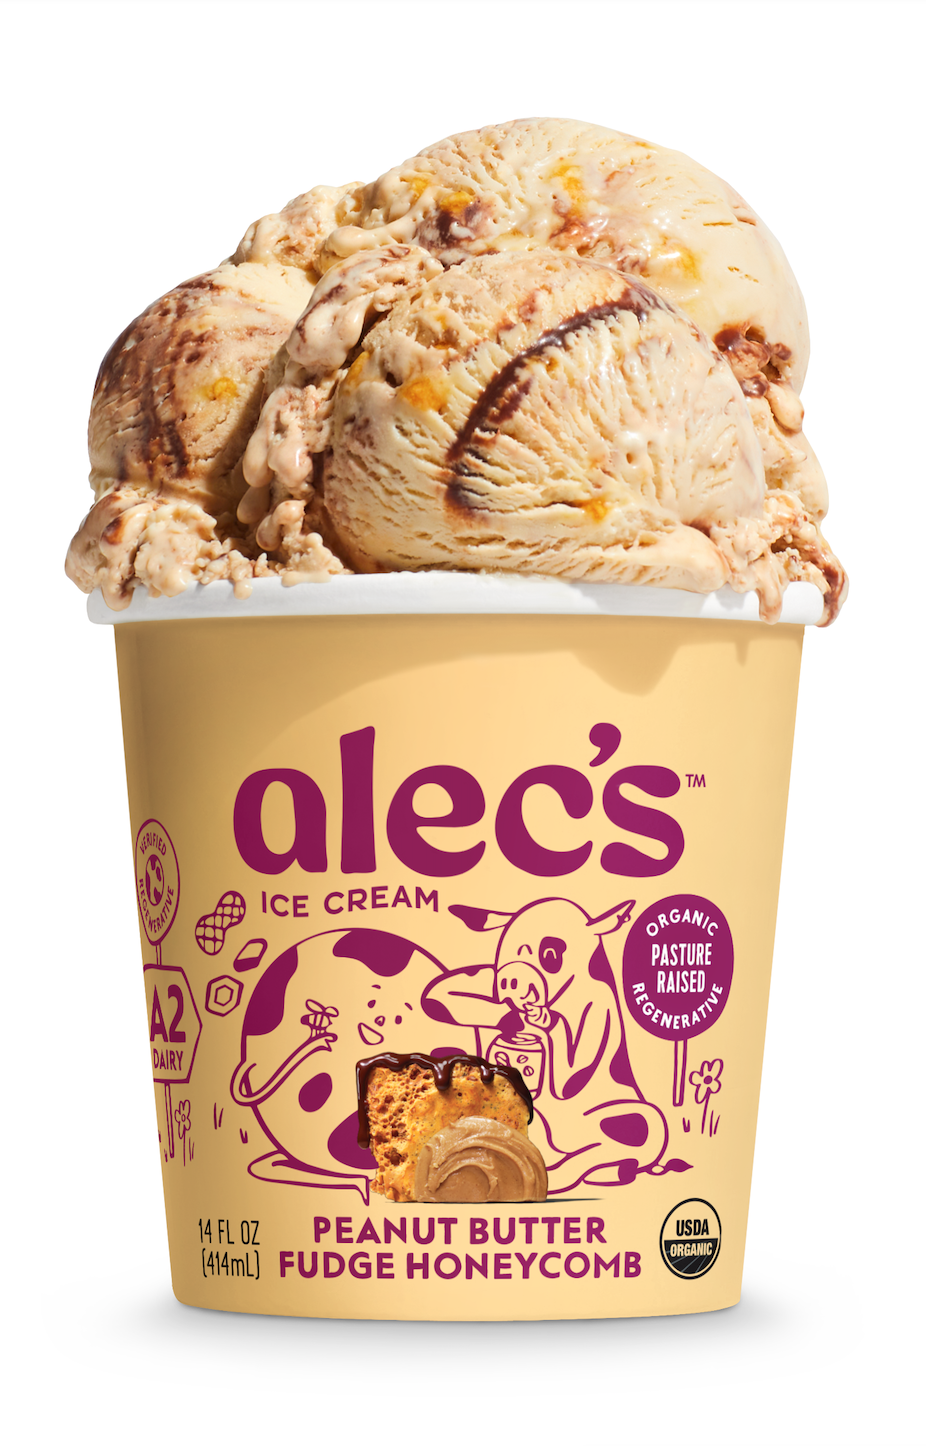 Alec’s Ice Cream Goes Nationwide, Now Available in Over 1,000 Stores Including Sprouts Farmers Markets and Natural Grocers